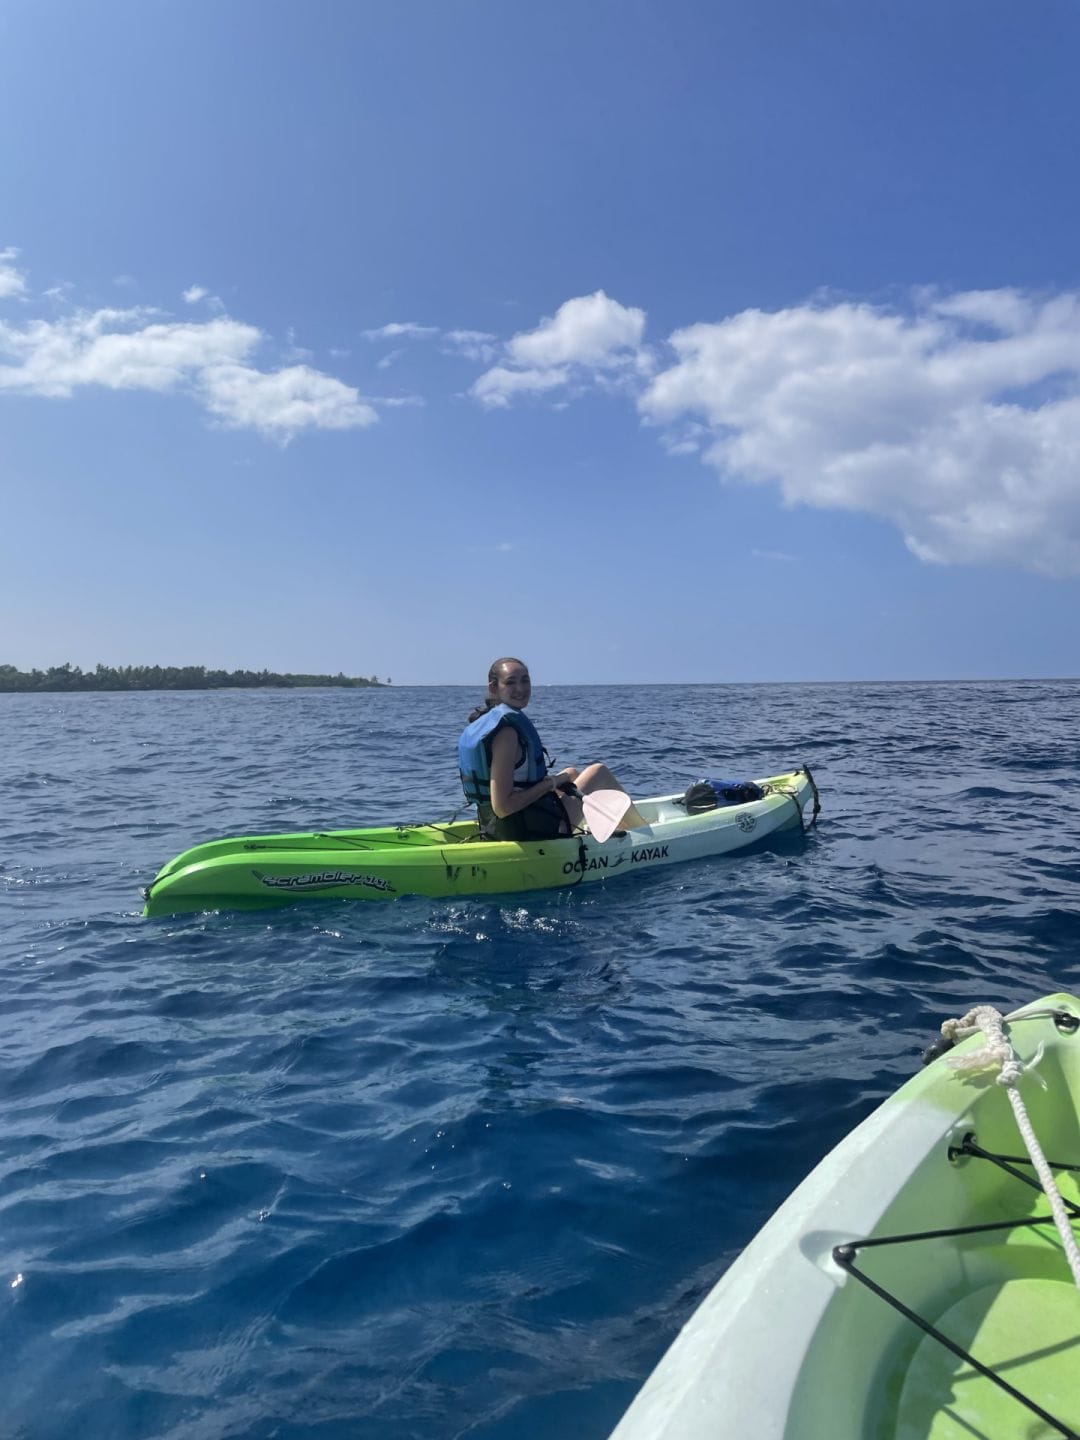 a woman yogi in a green and white one person paddle board on the ocean in Hawaii under a sunny blue sky with white clouds